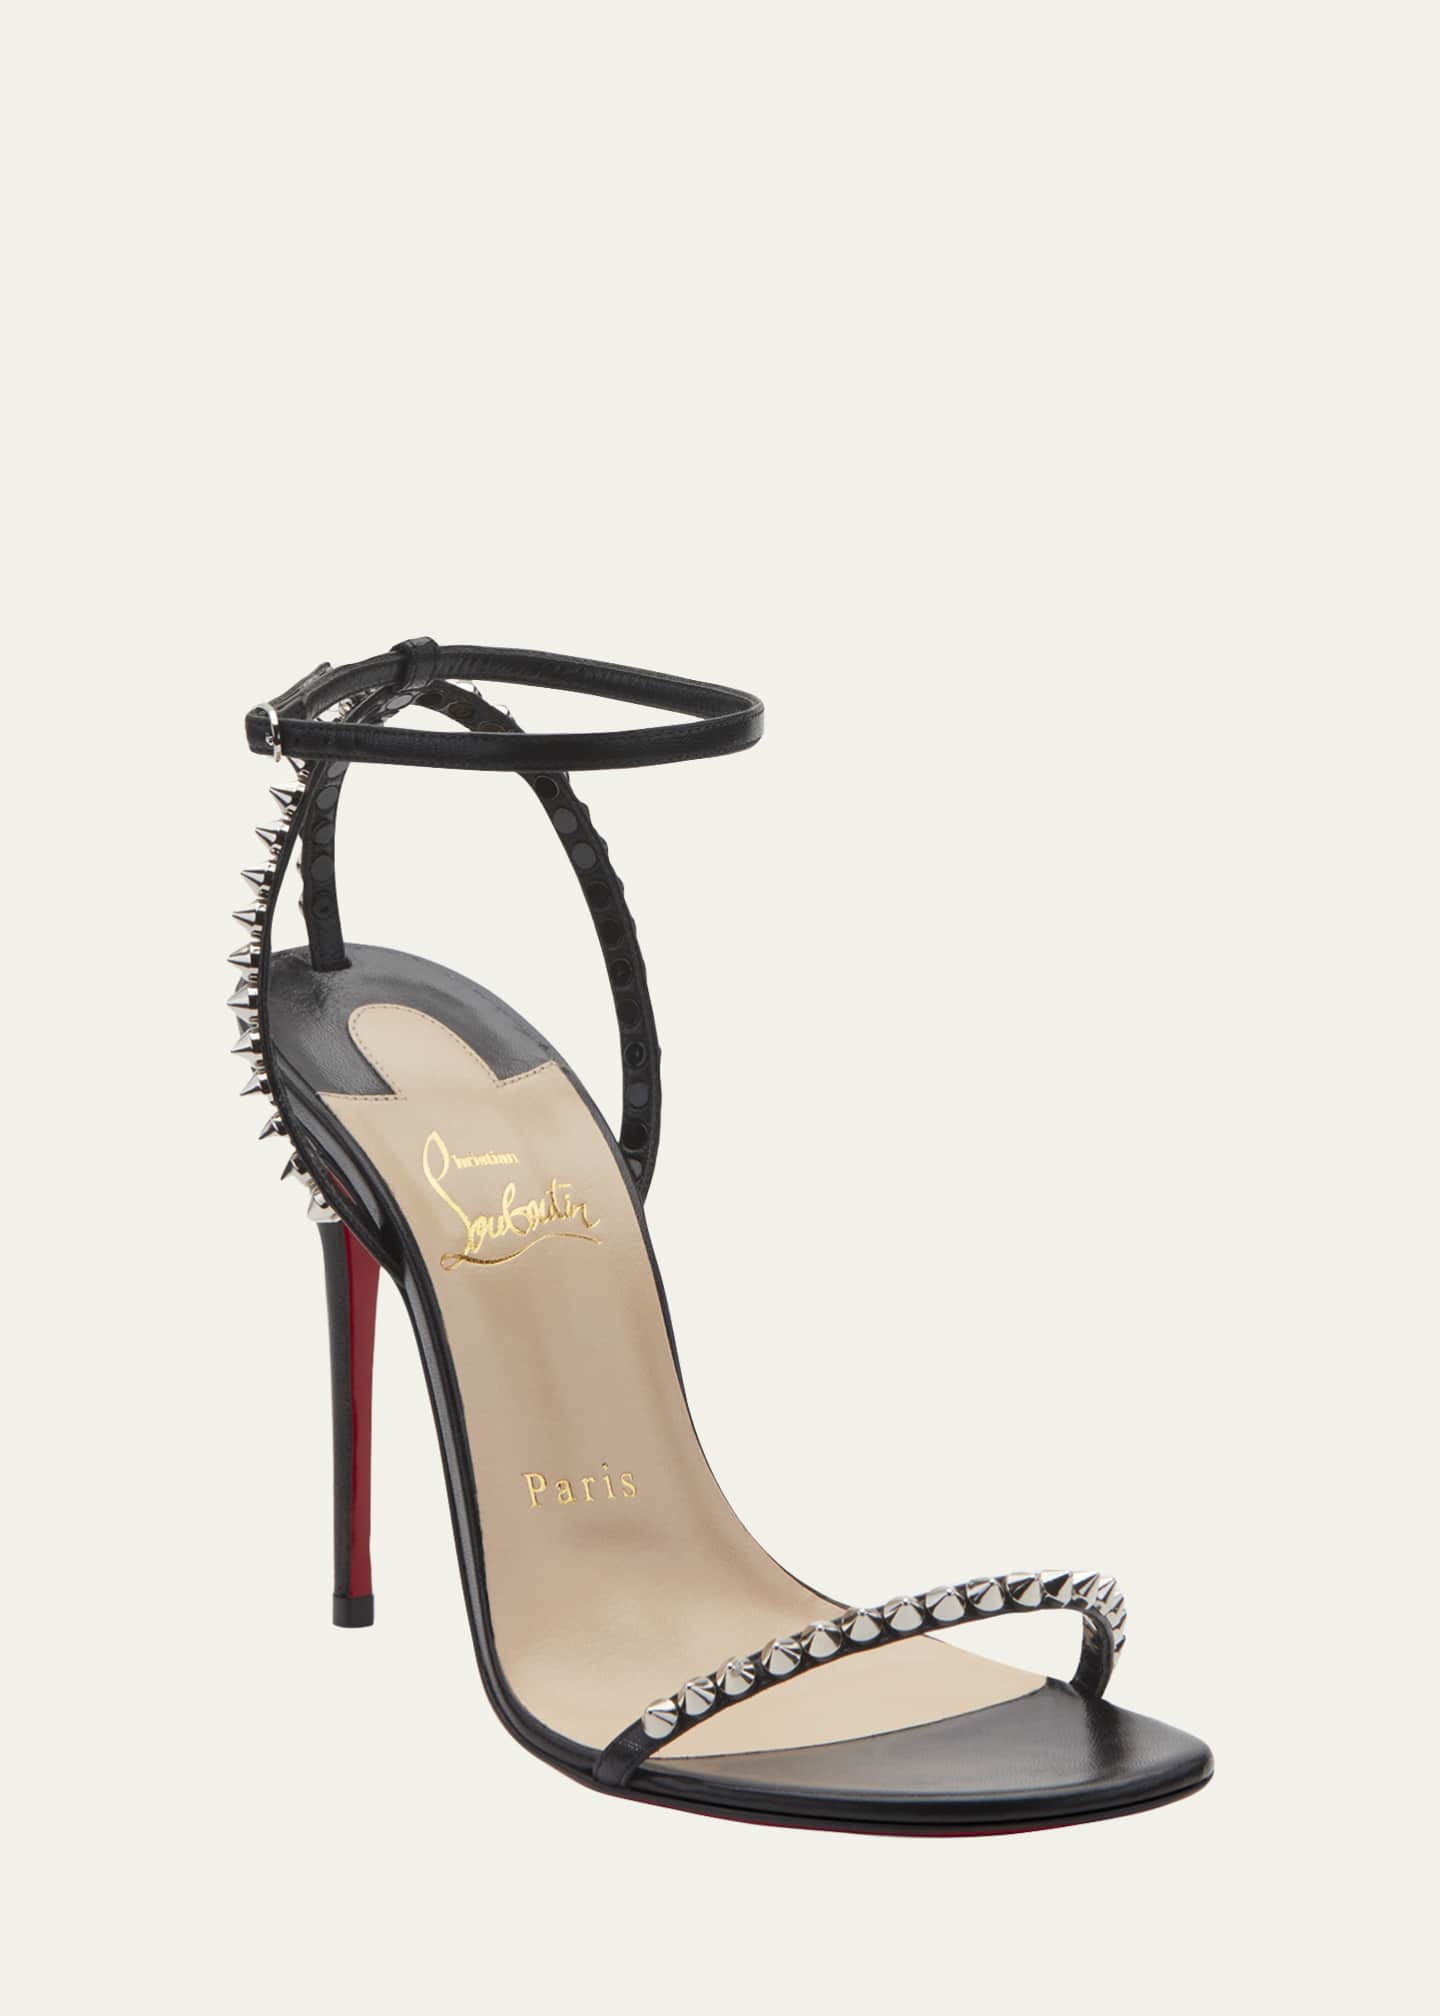 Womens Christian Louboutin Shoes, Red Sole Shoes